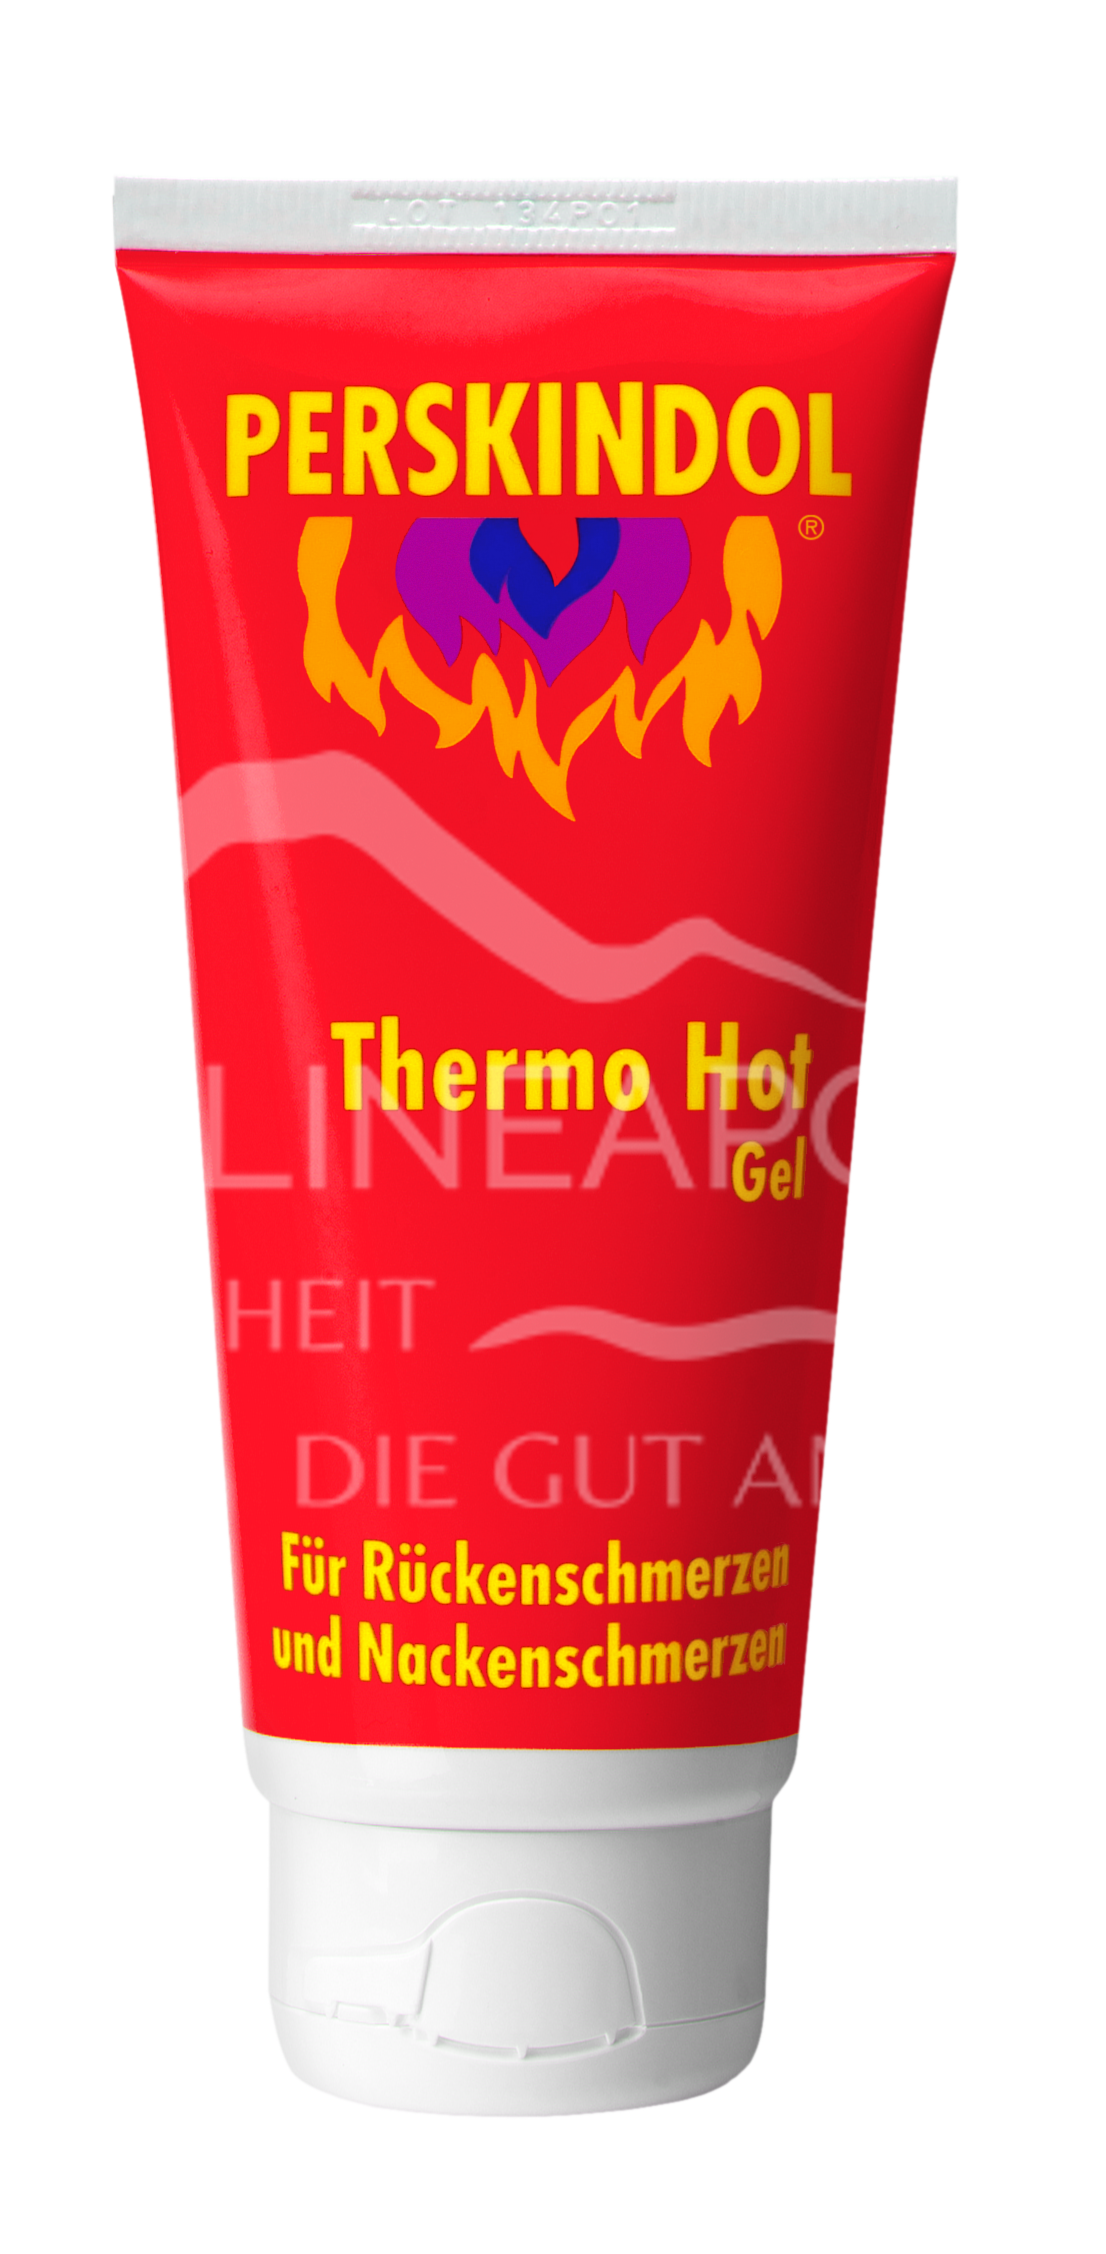 Perskindol® Thermo Hot Gel